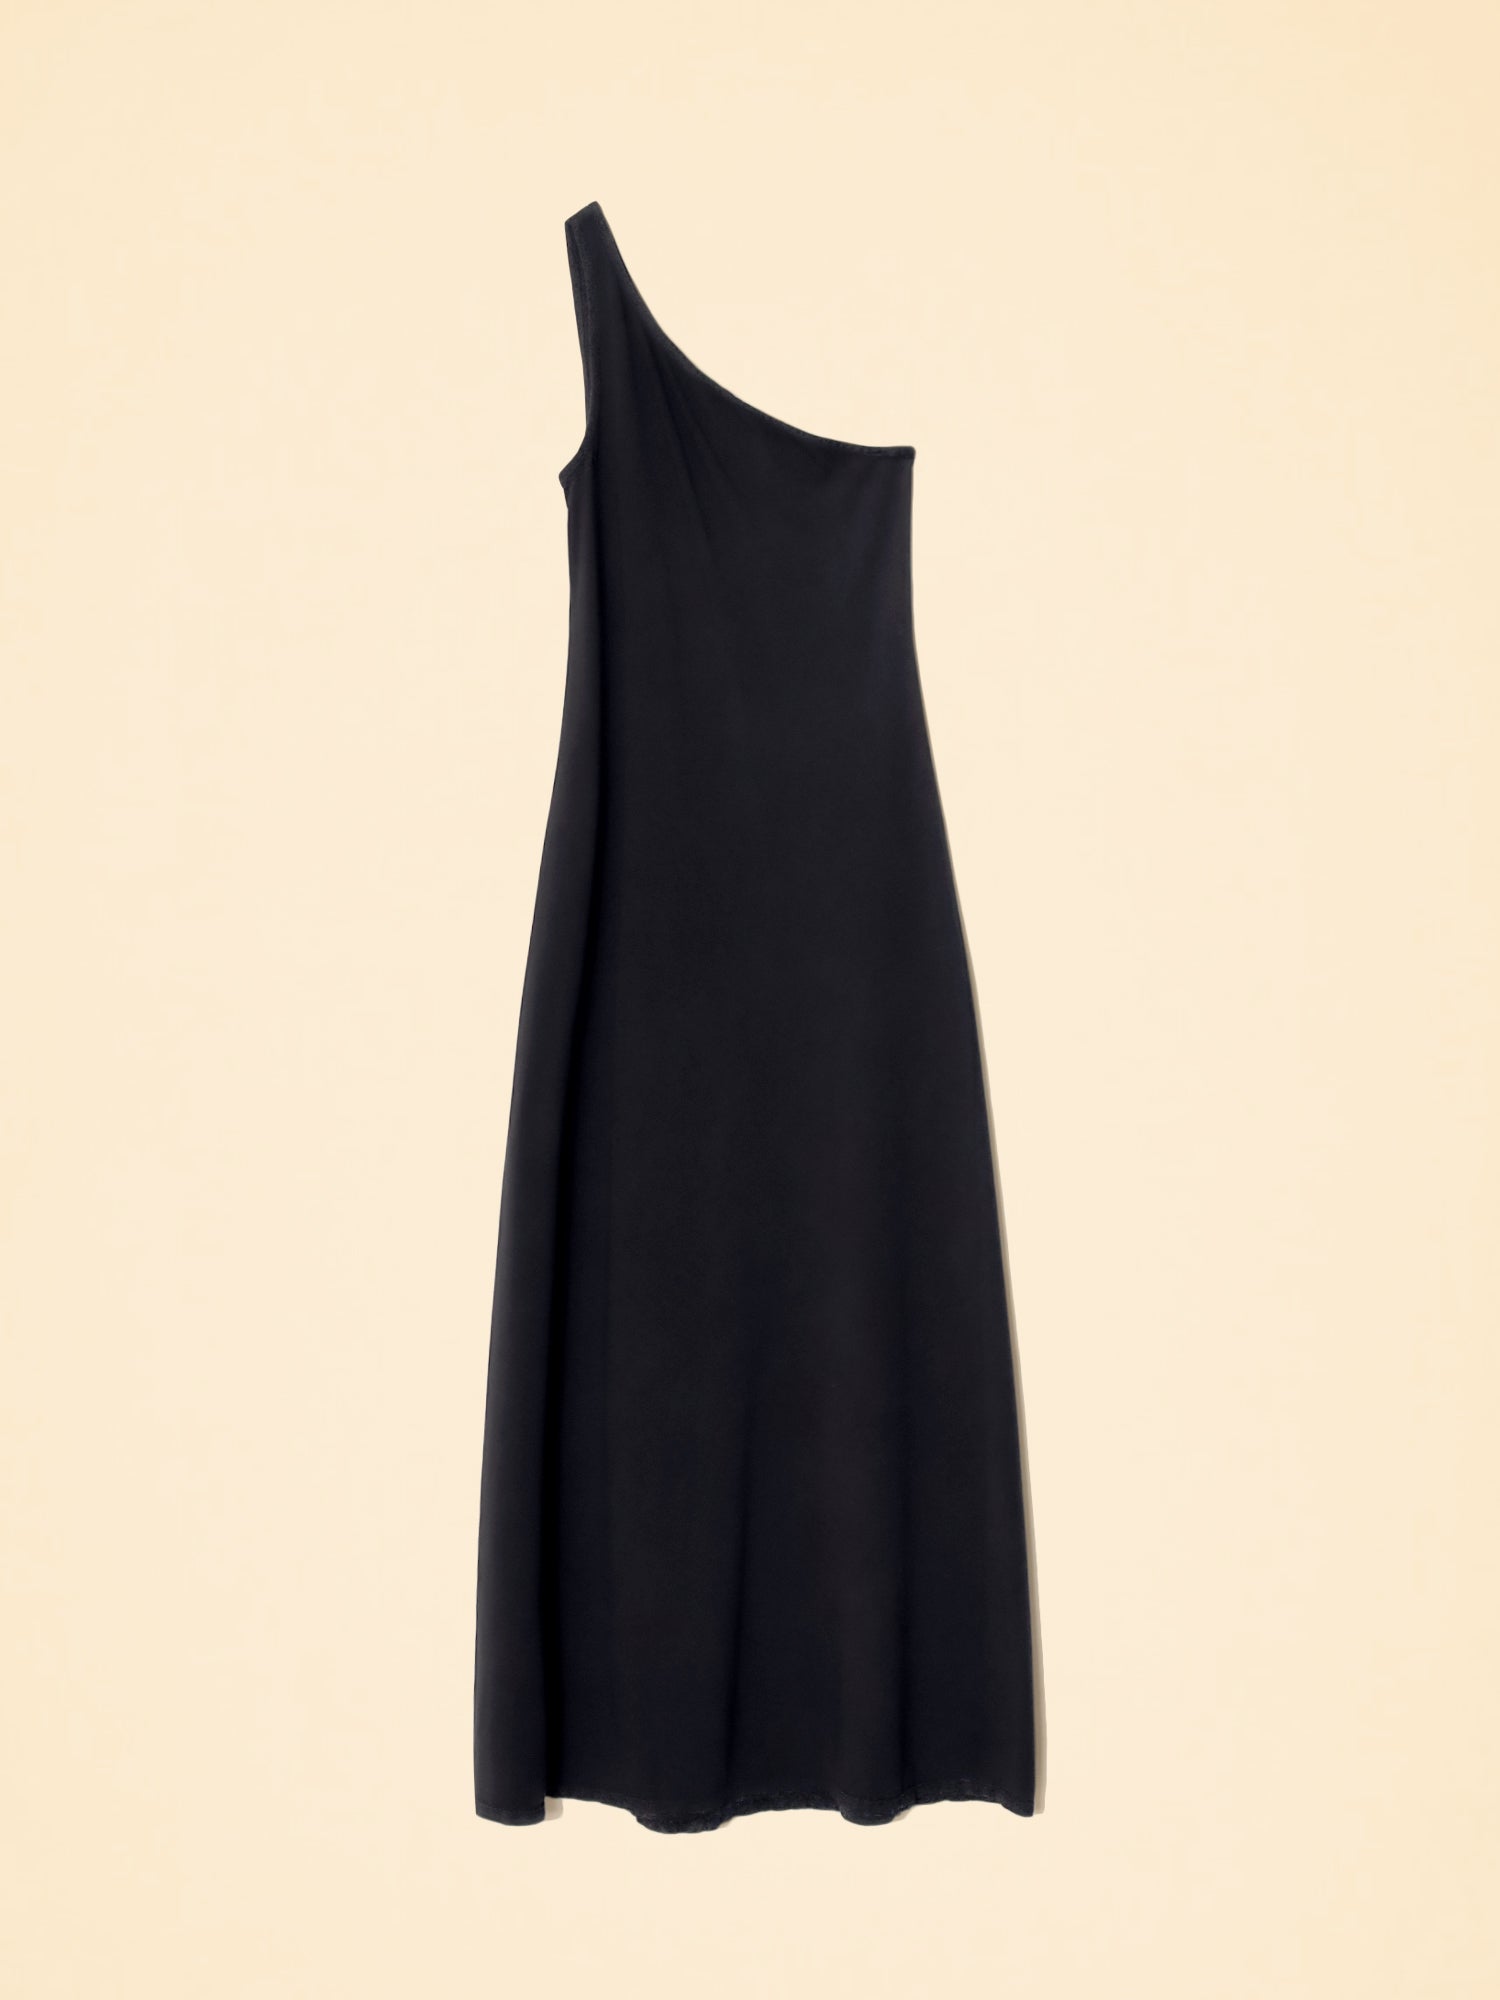 Xirena Genevieve Dress-Dresses and Jumpsuits-Misch-Boutique-Vancouver-Canada-misch.ca